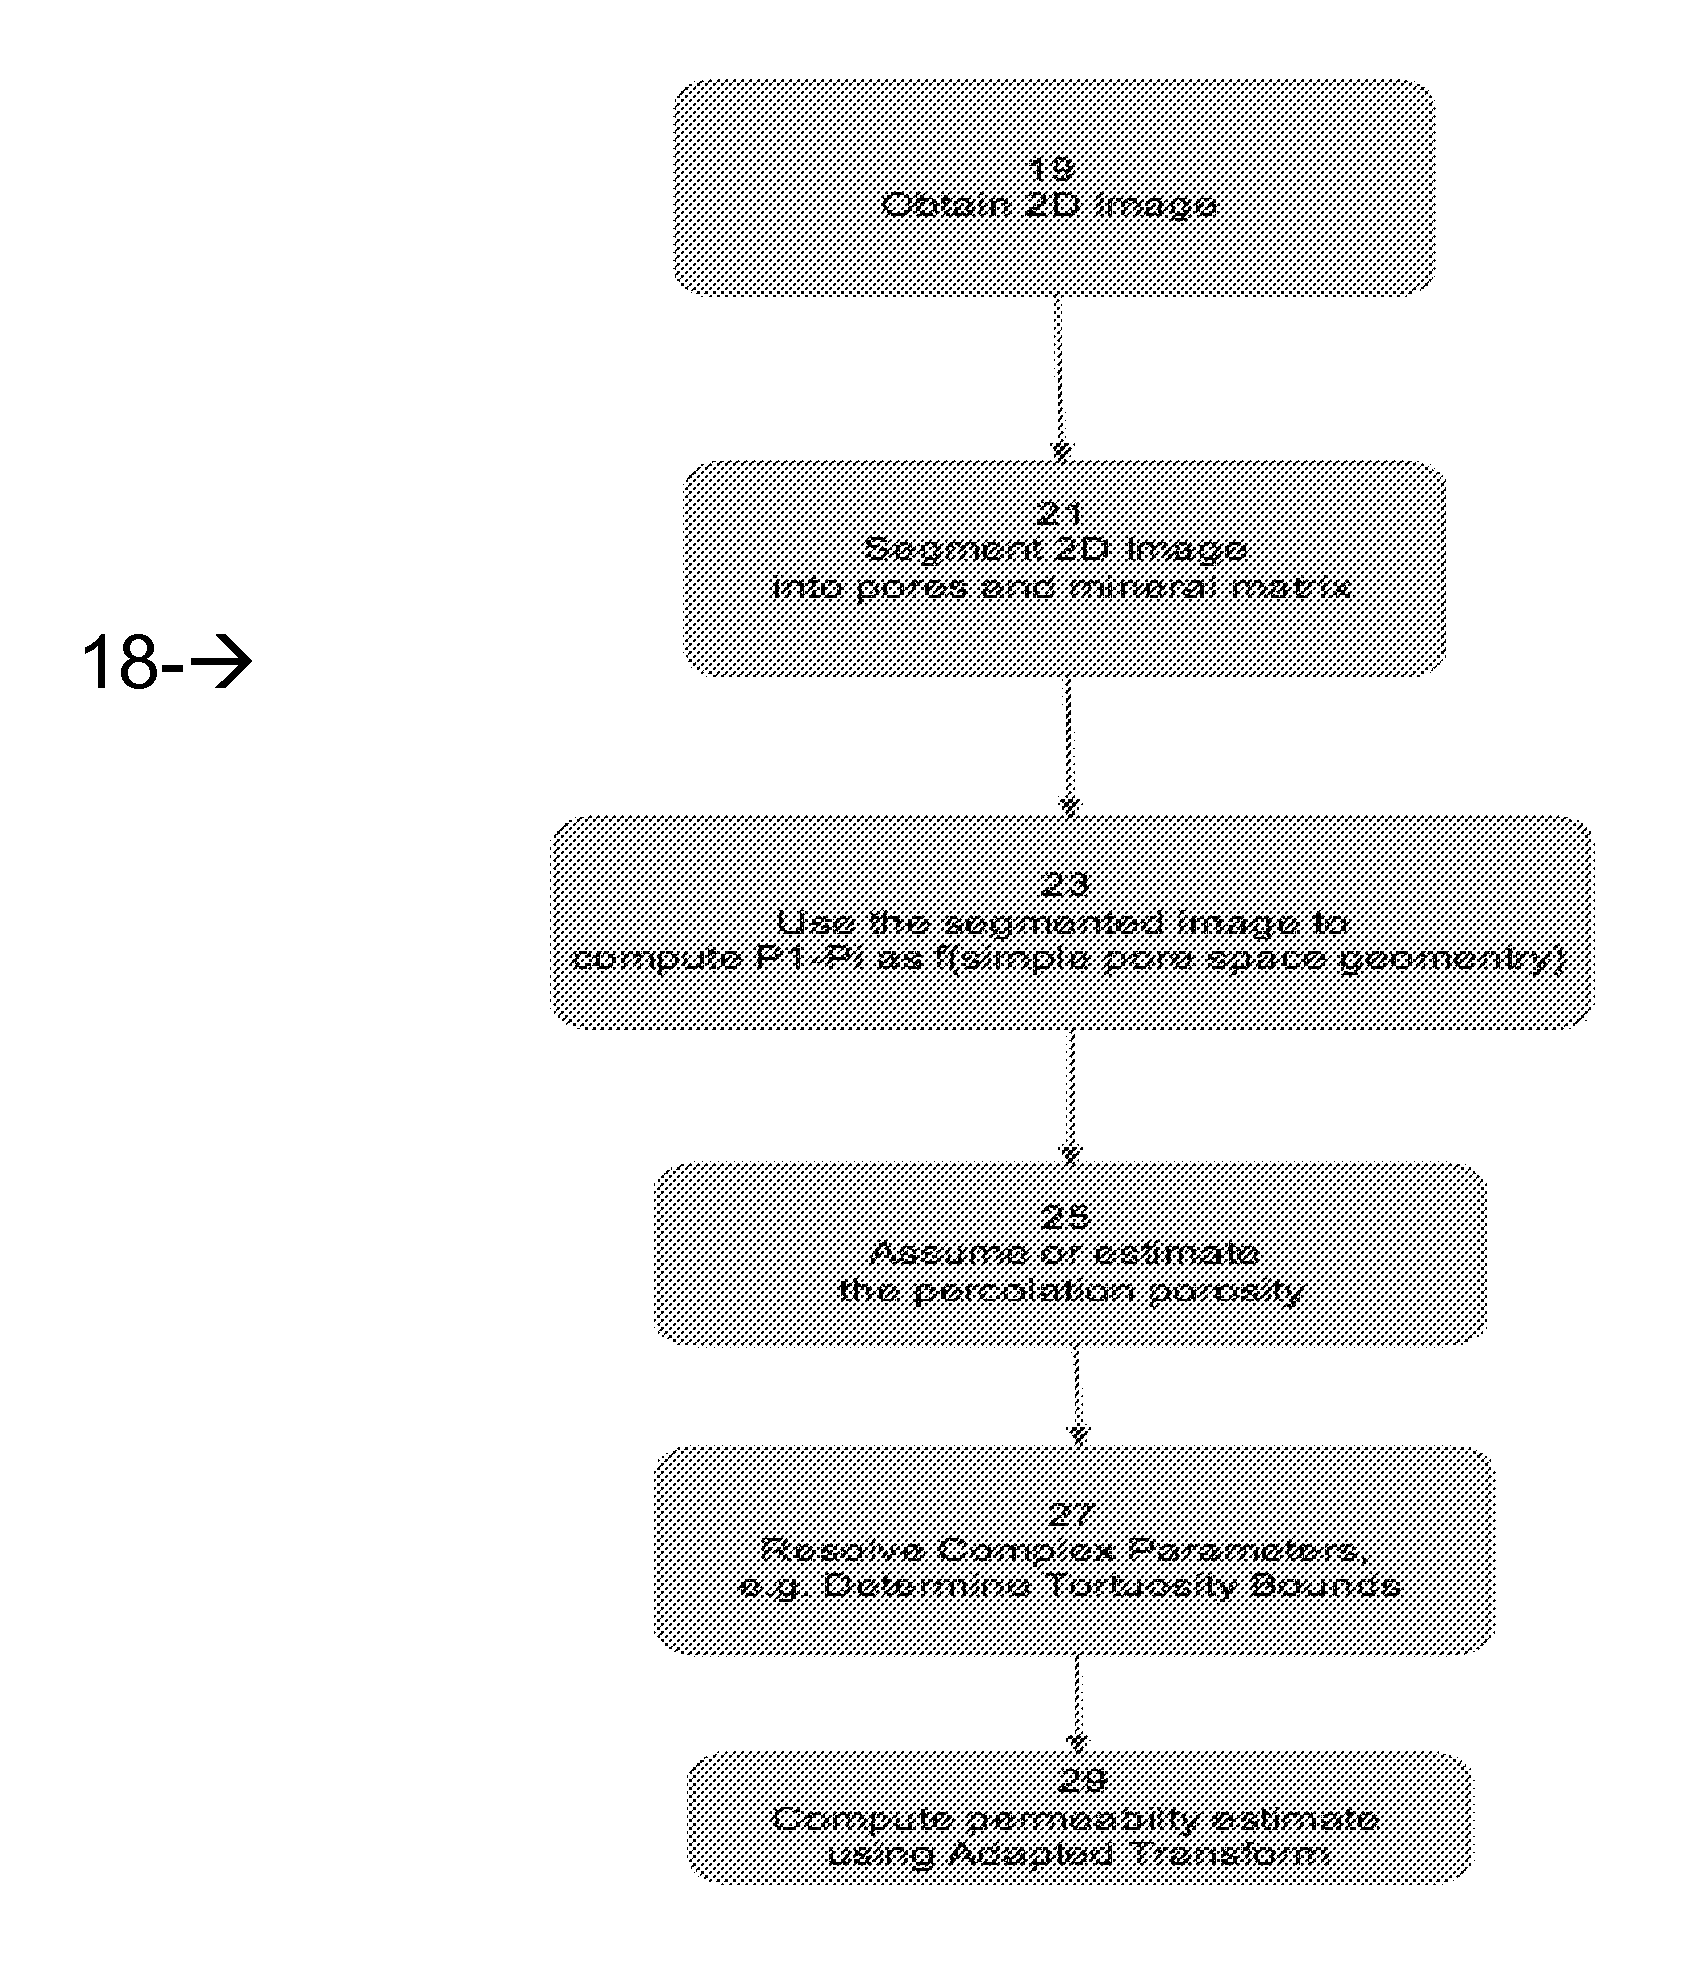 Method And System For Estimating Rock Properties From Rock Samples Using Digital Rock Physics Imaging